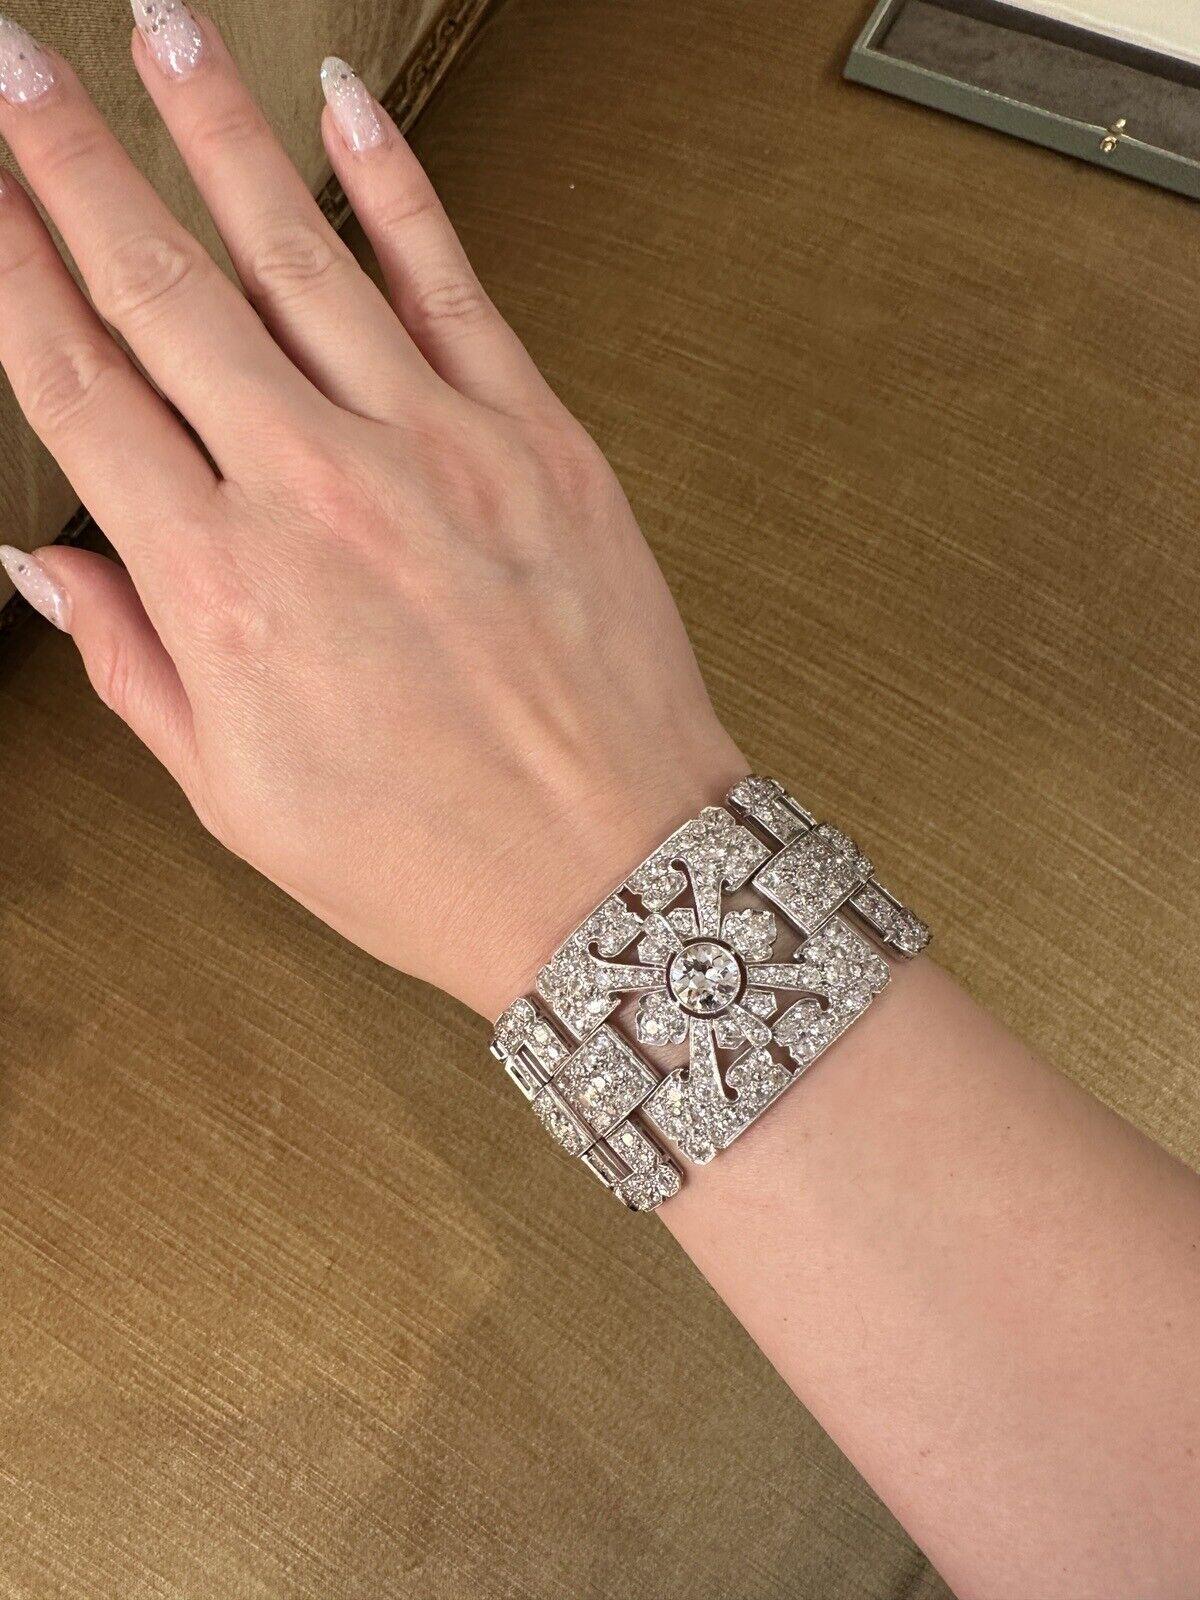 Wide Vintage Diamond Bracelet 35 carats in Platinum and White Gold. 

Wide Vintage Diamond Bracelet features three large European Cut Diamonds in the center of each square panel. The weight of the center diamond is estimated at 2.15 carats; the